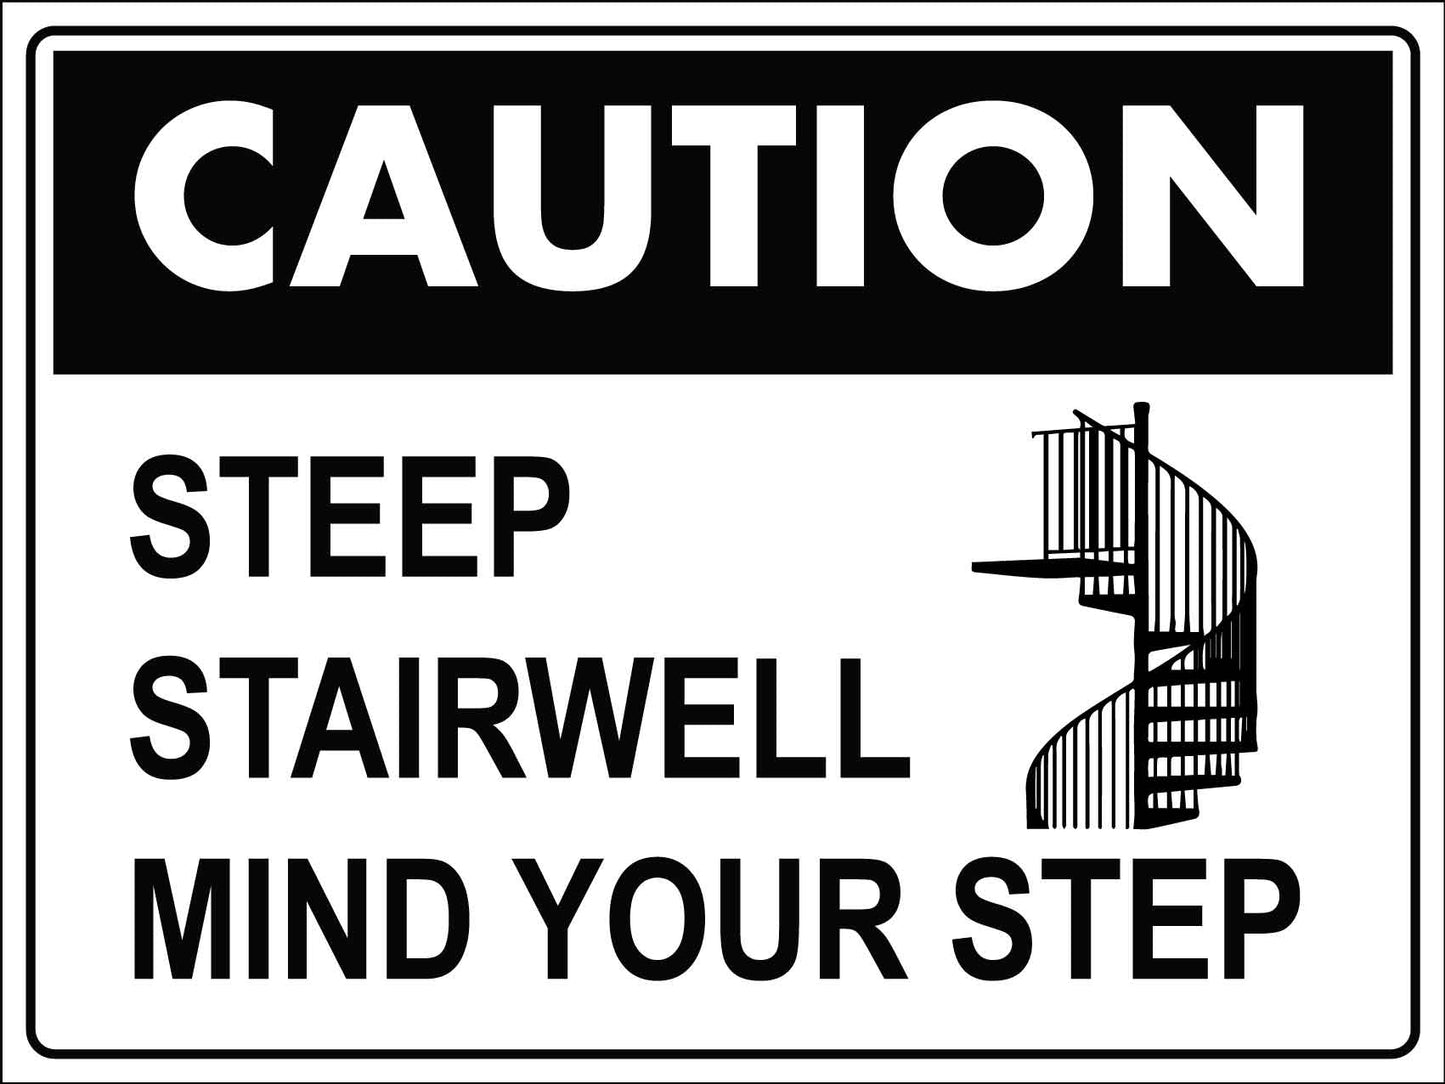 Caution Stairwell Watch Your Step Sign